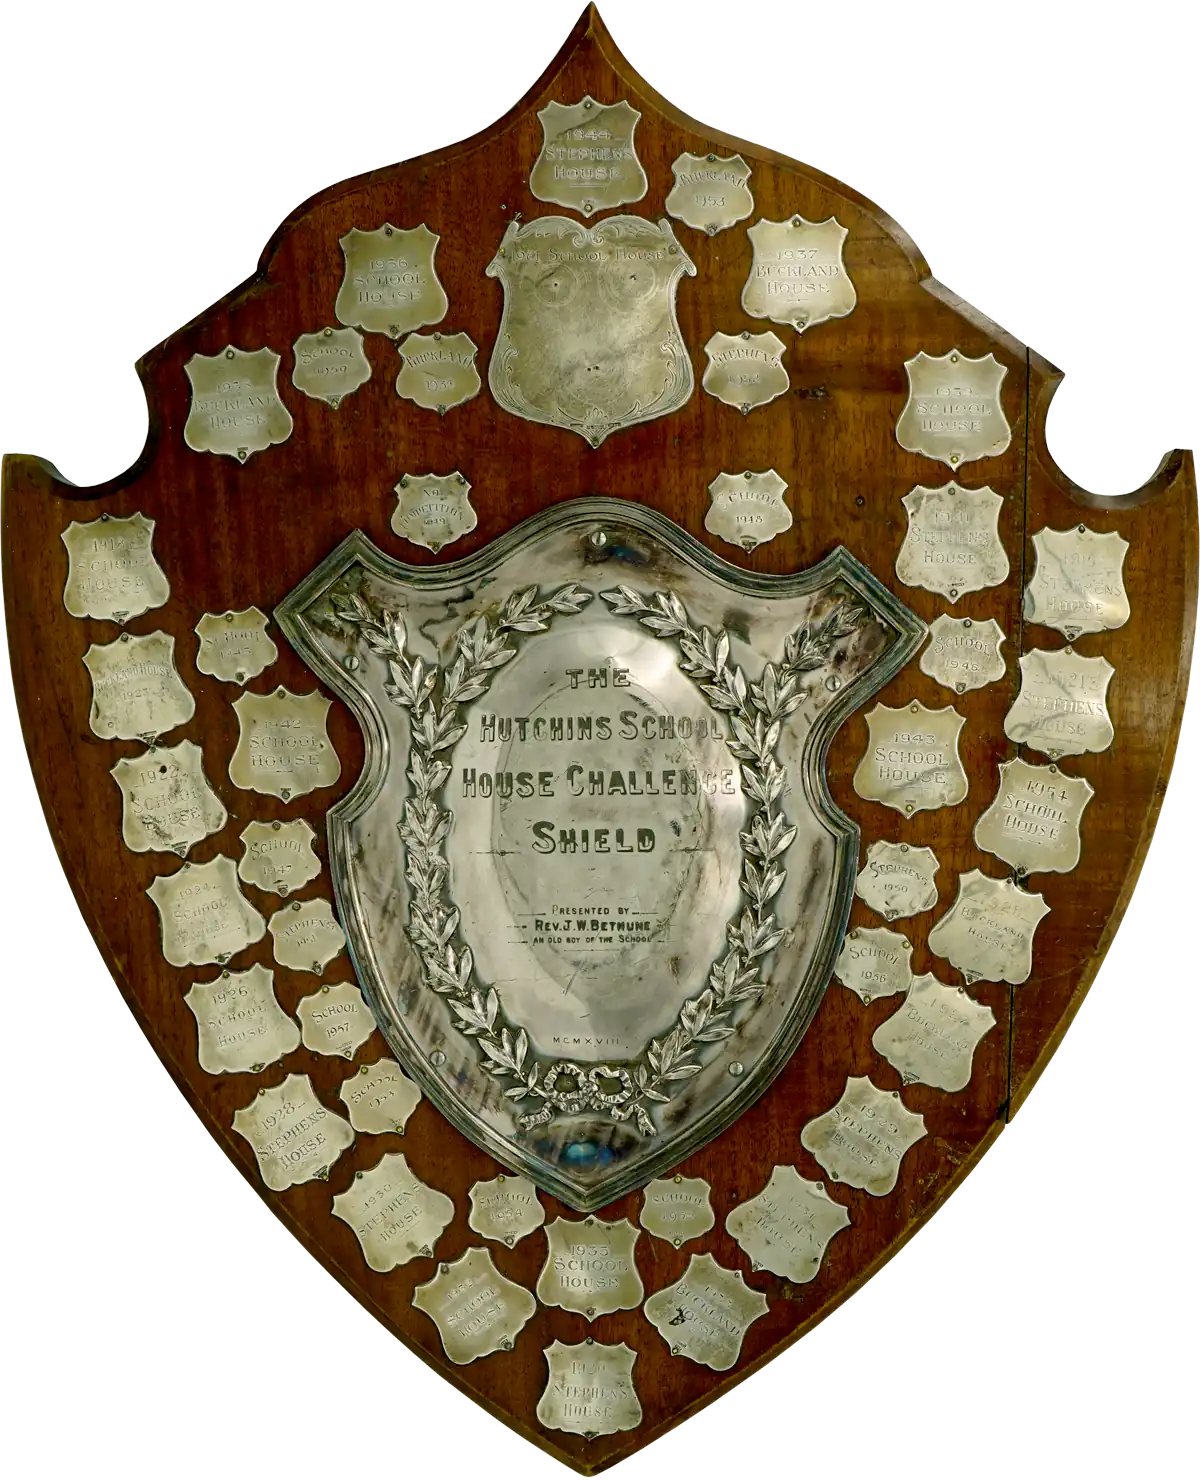 Bethune Shield for House Challenge, 1918.